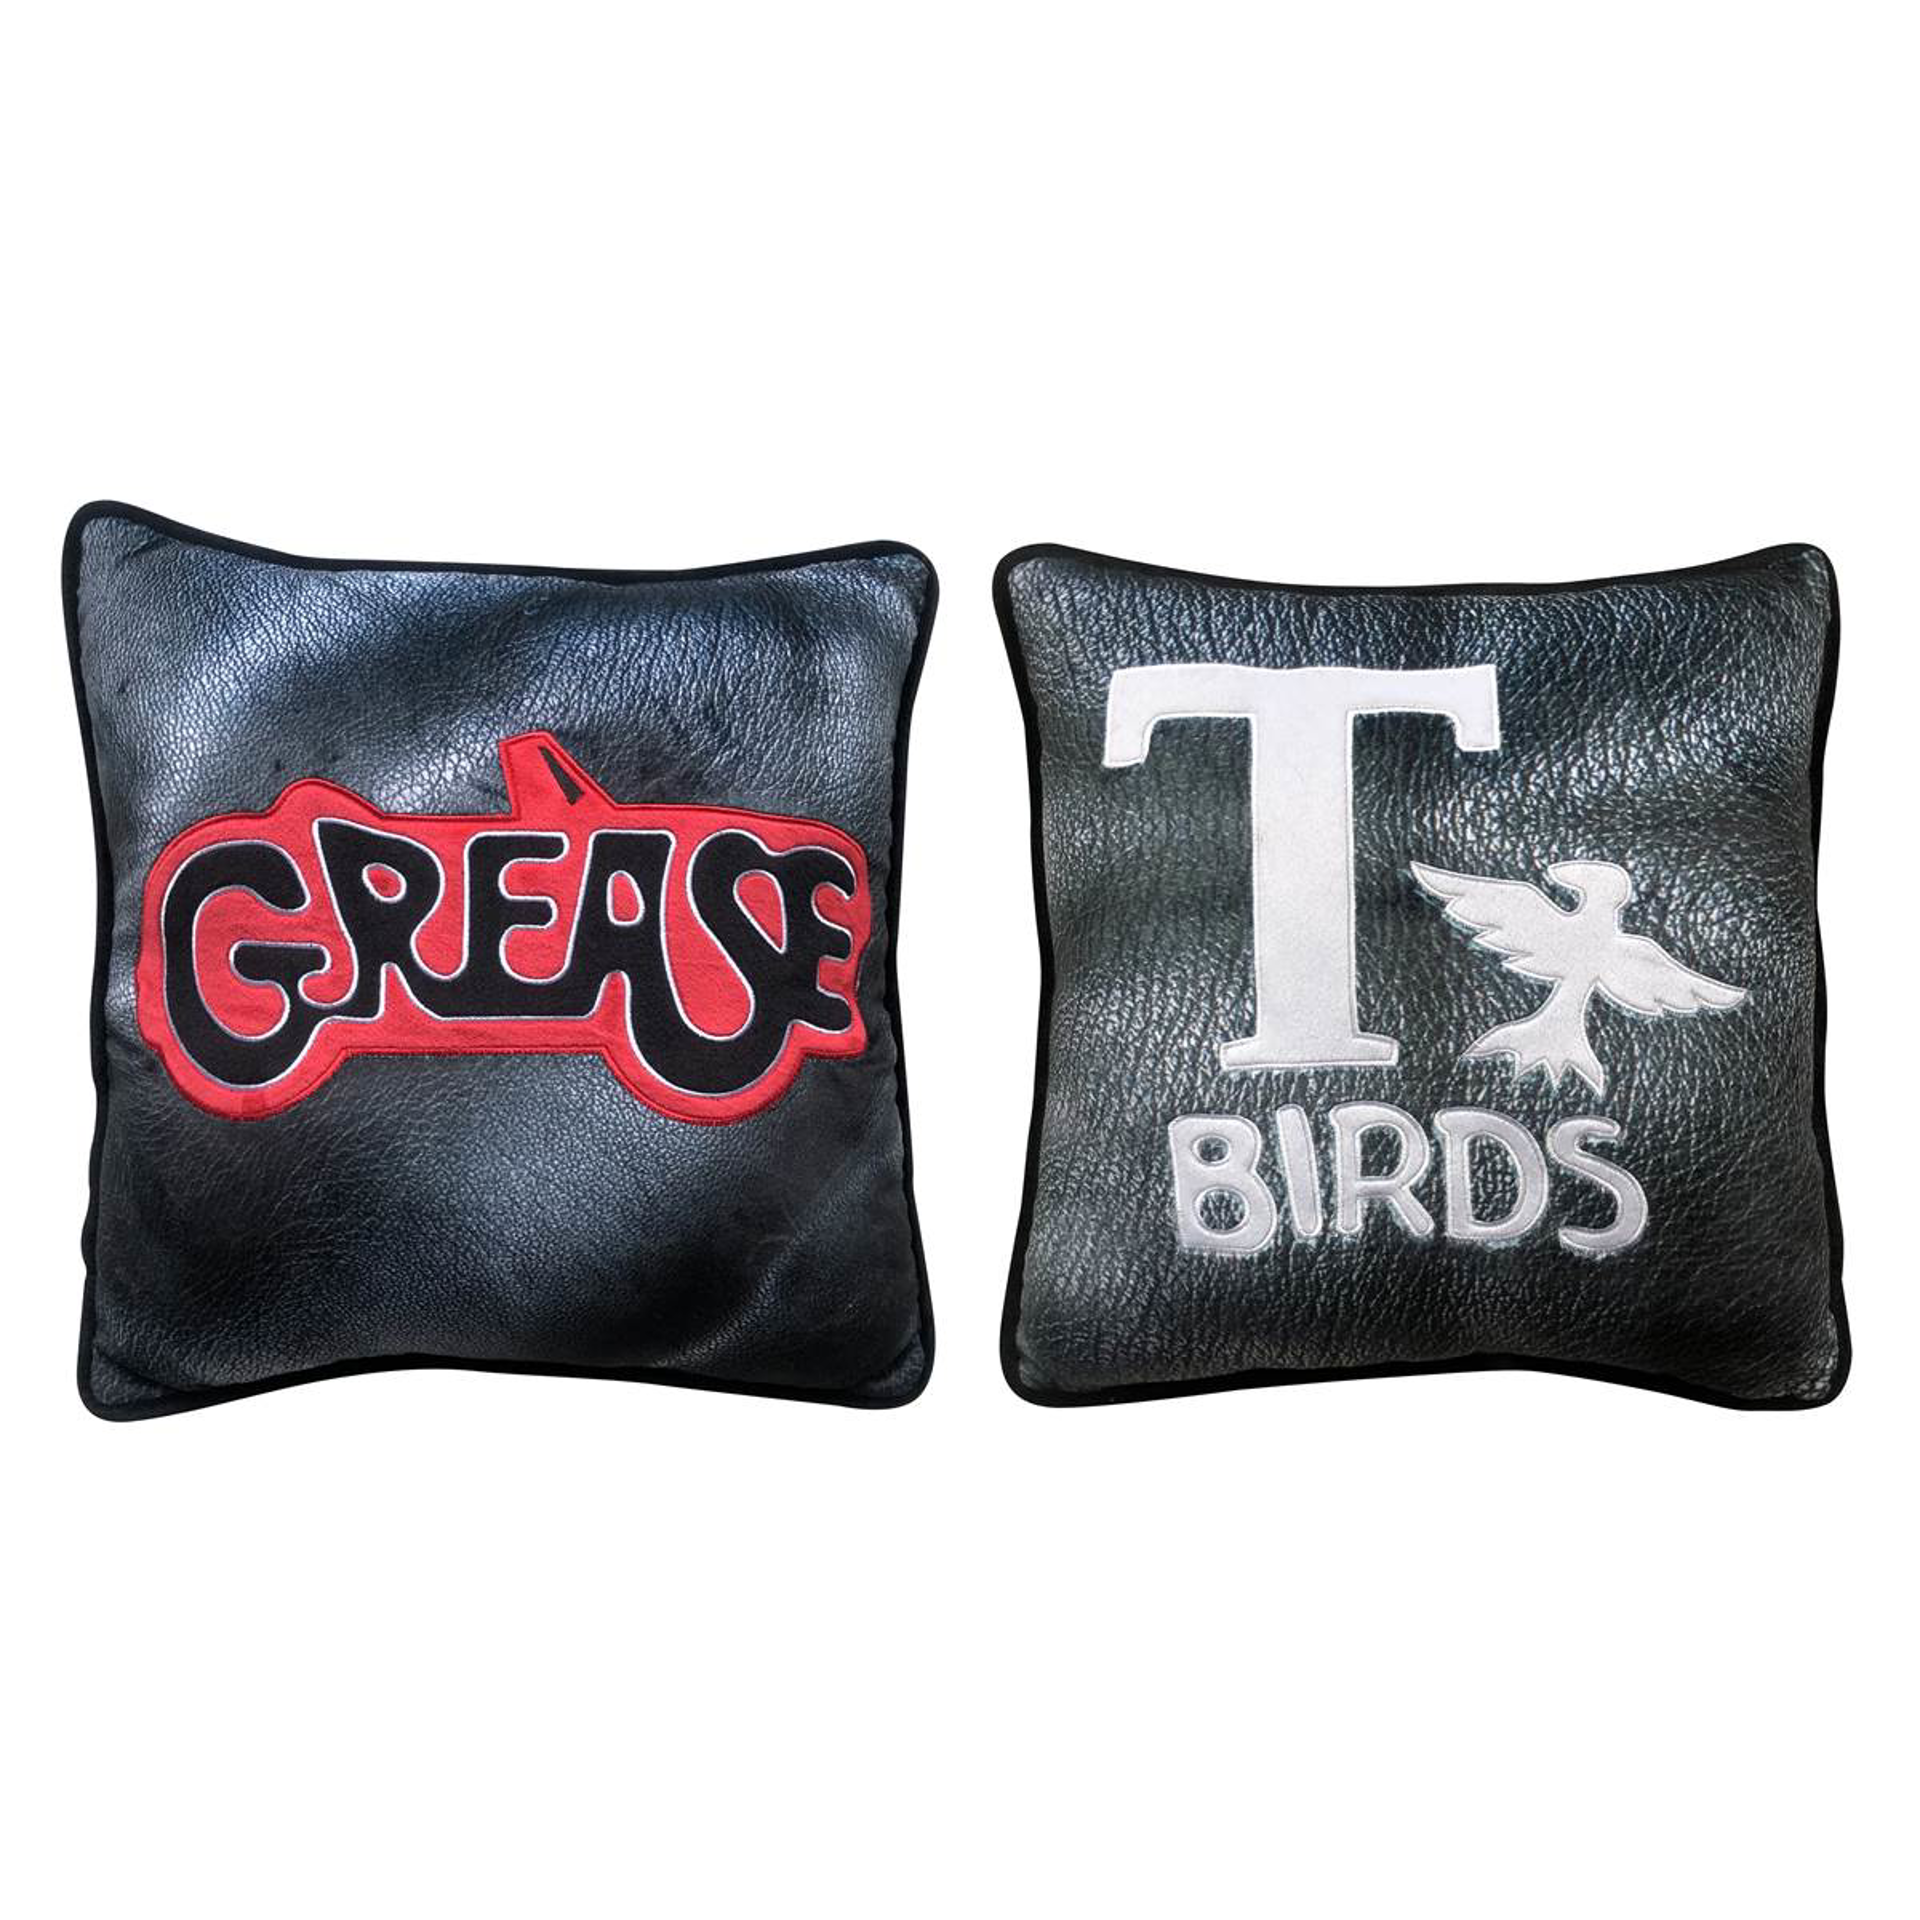 Grease - Coussin Carre 40 cm